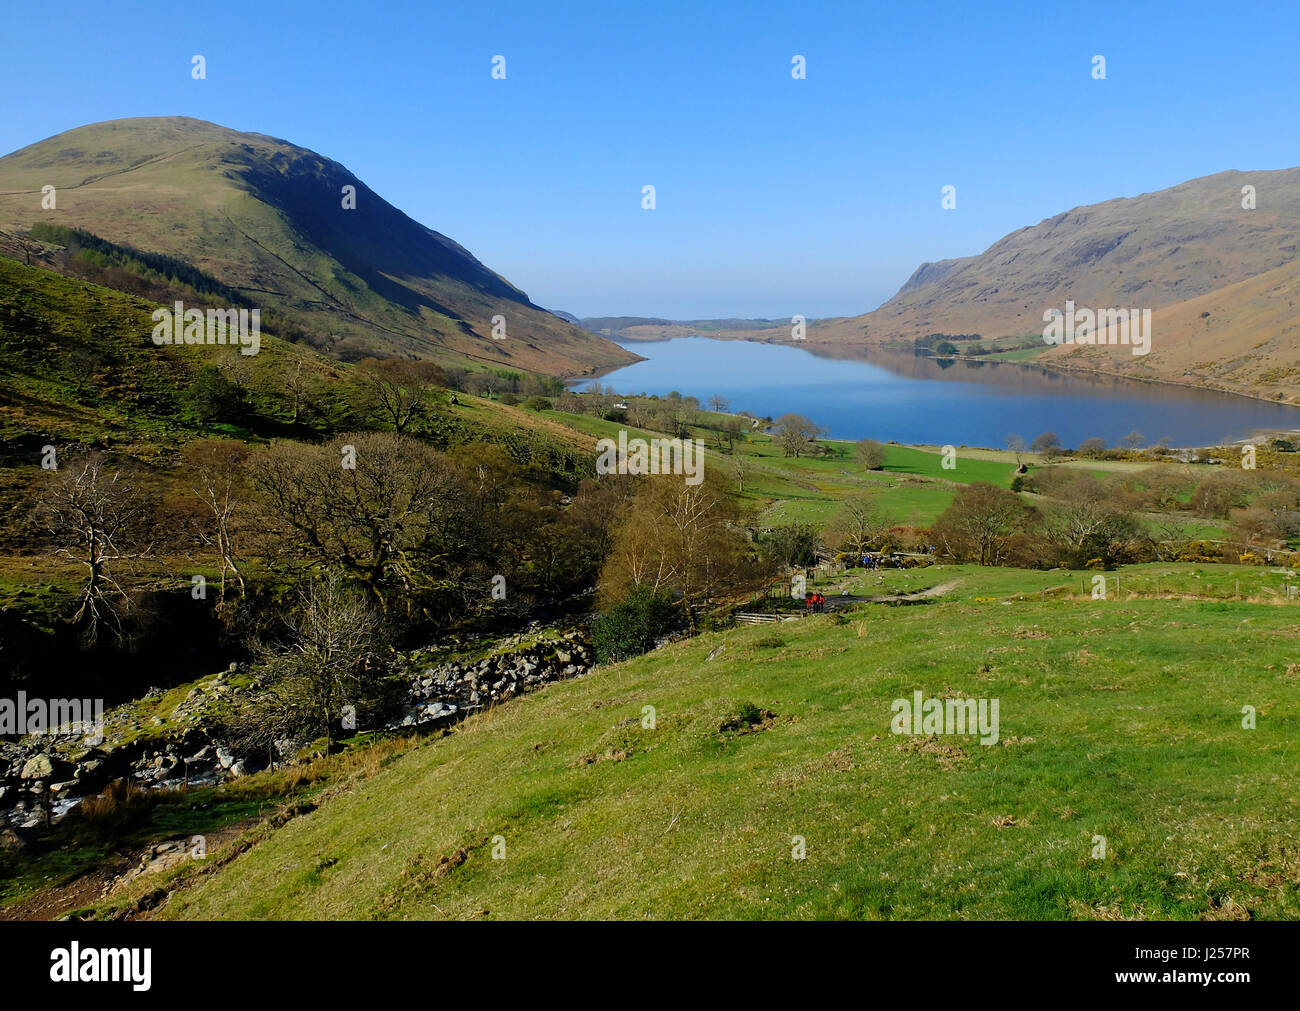 Wast Water (Wastwater) in the English Lake District, Cumbria, UK, starting point for hikes to Scafell Pike, England's highest mountain. Stock Photo